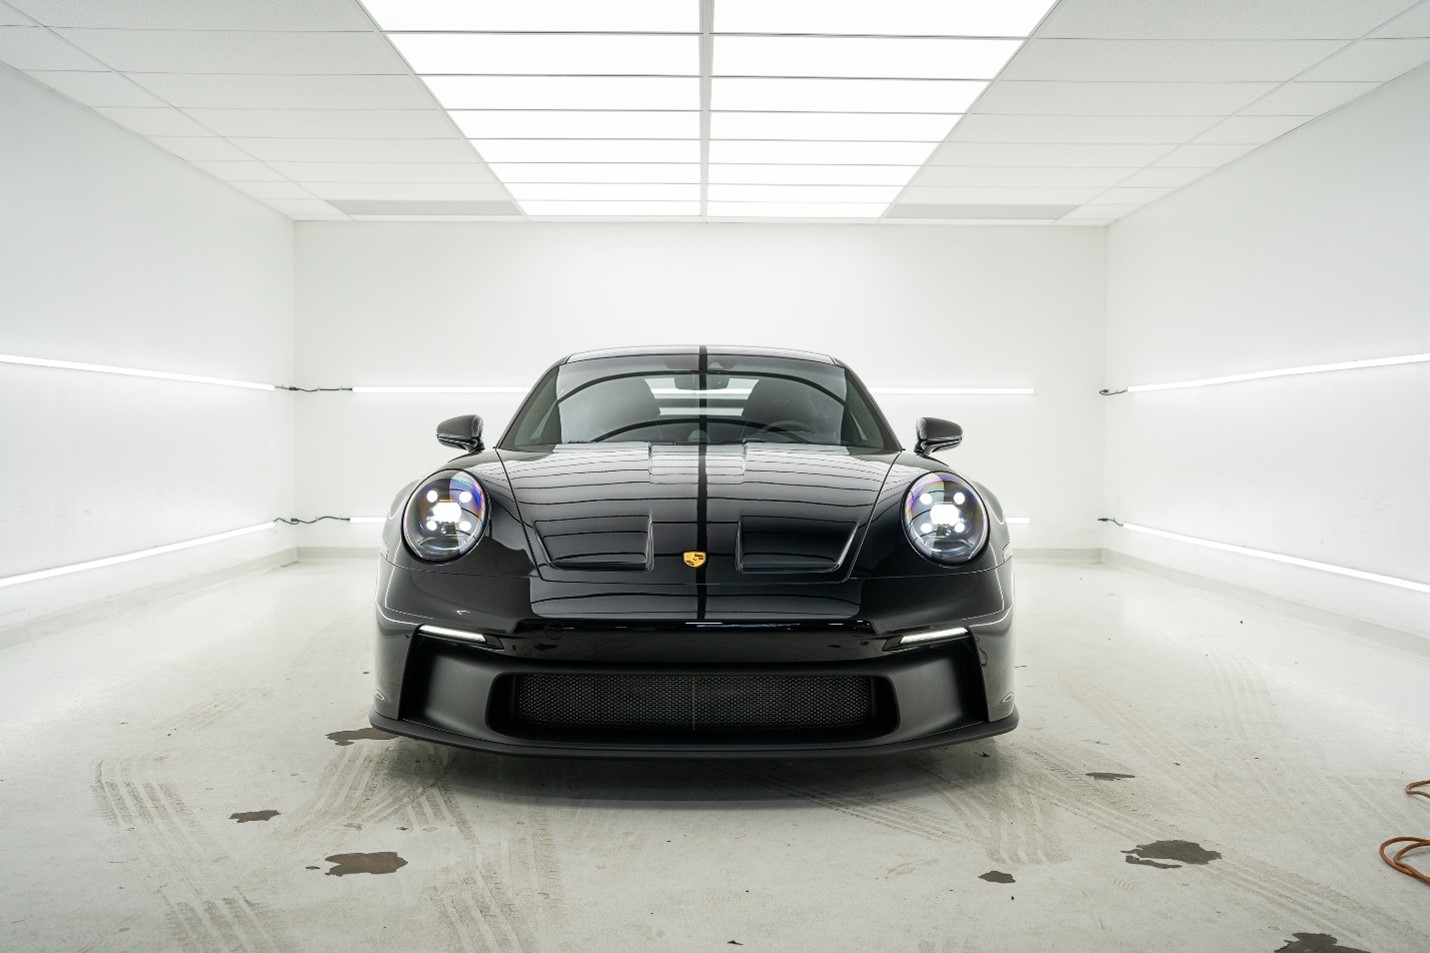 3 Reasons to protect your Porsche with XPEL PPF - A-PLUS TINT +